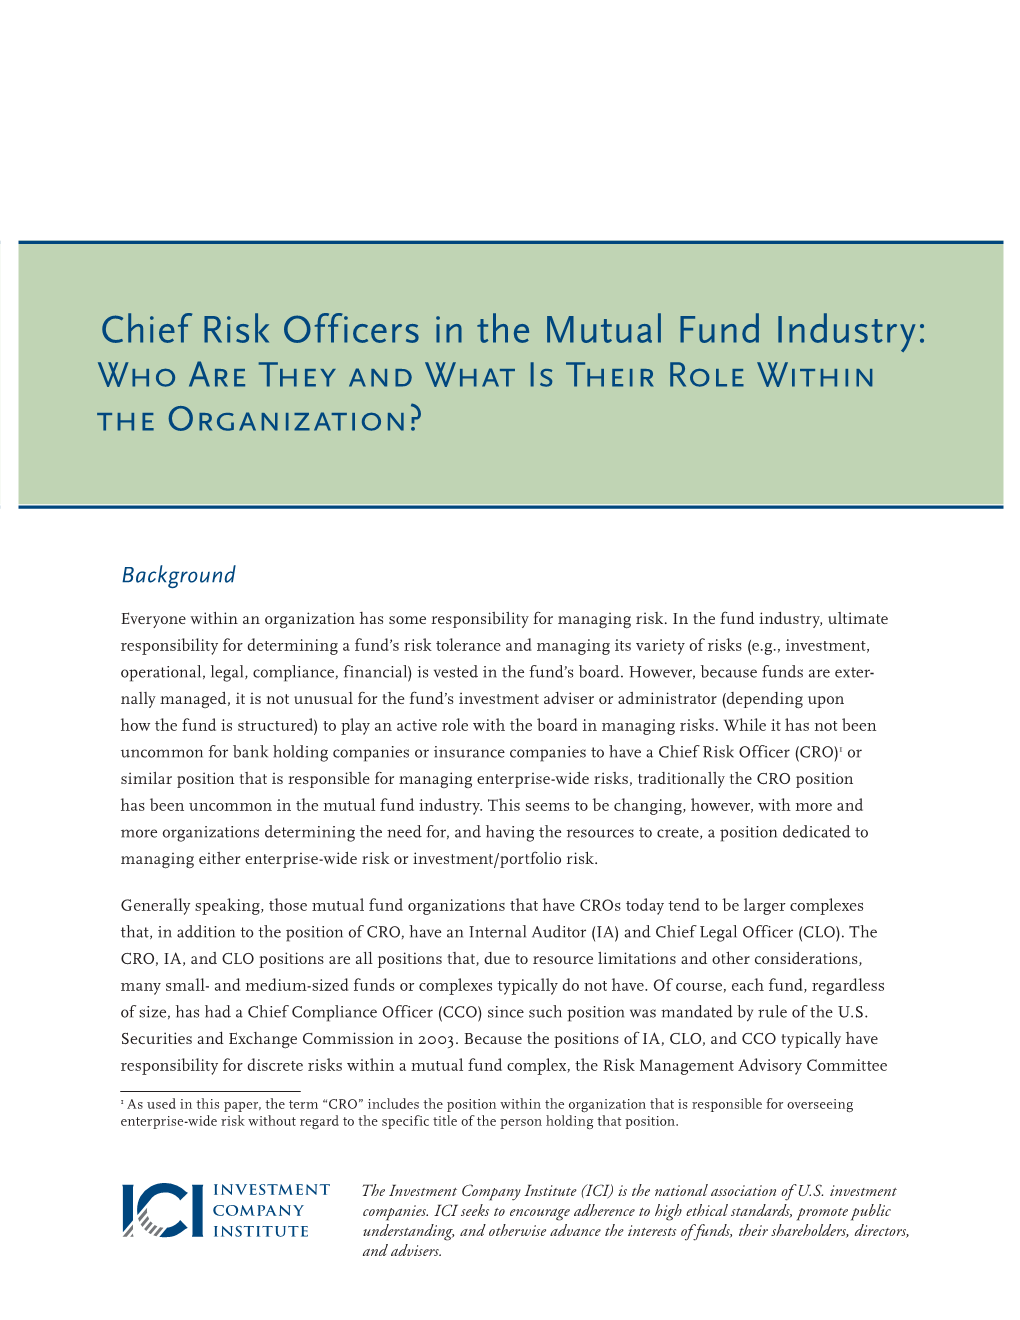 Chief Risk Officers in the Mutual Fund Industry: Who Are They and What Is Their Role Within the Organization?